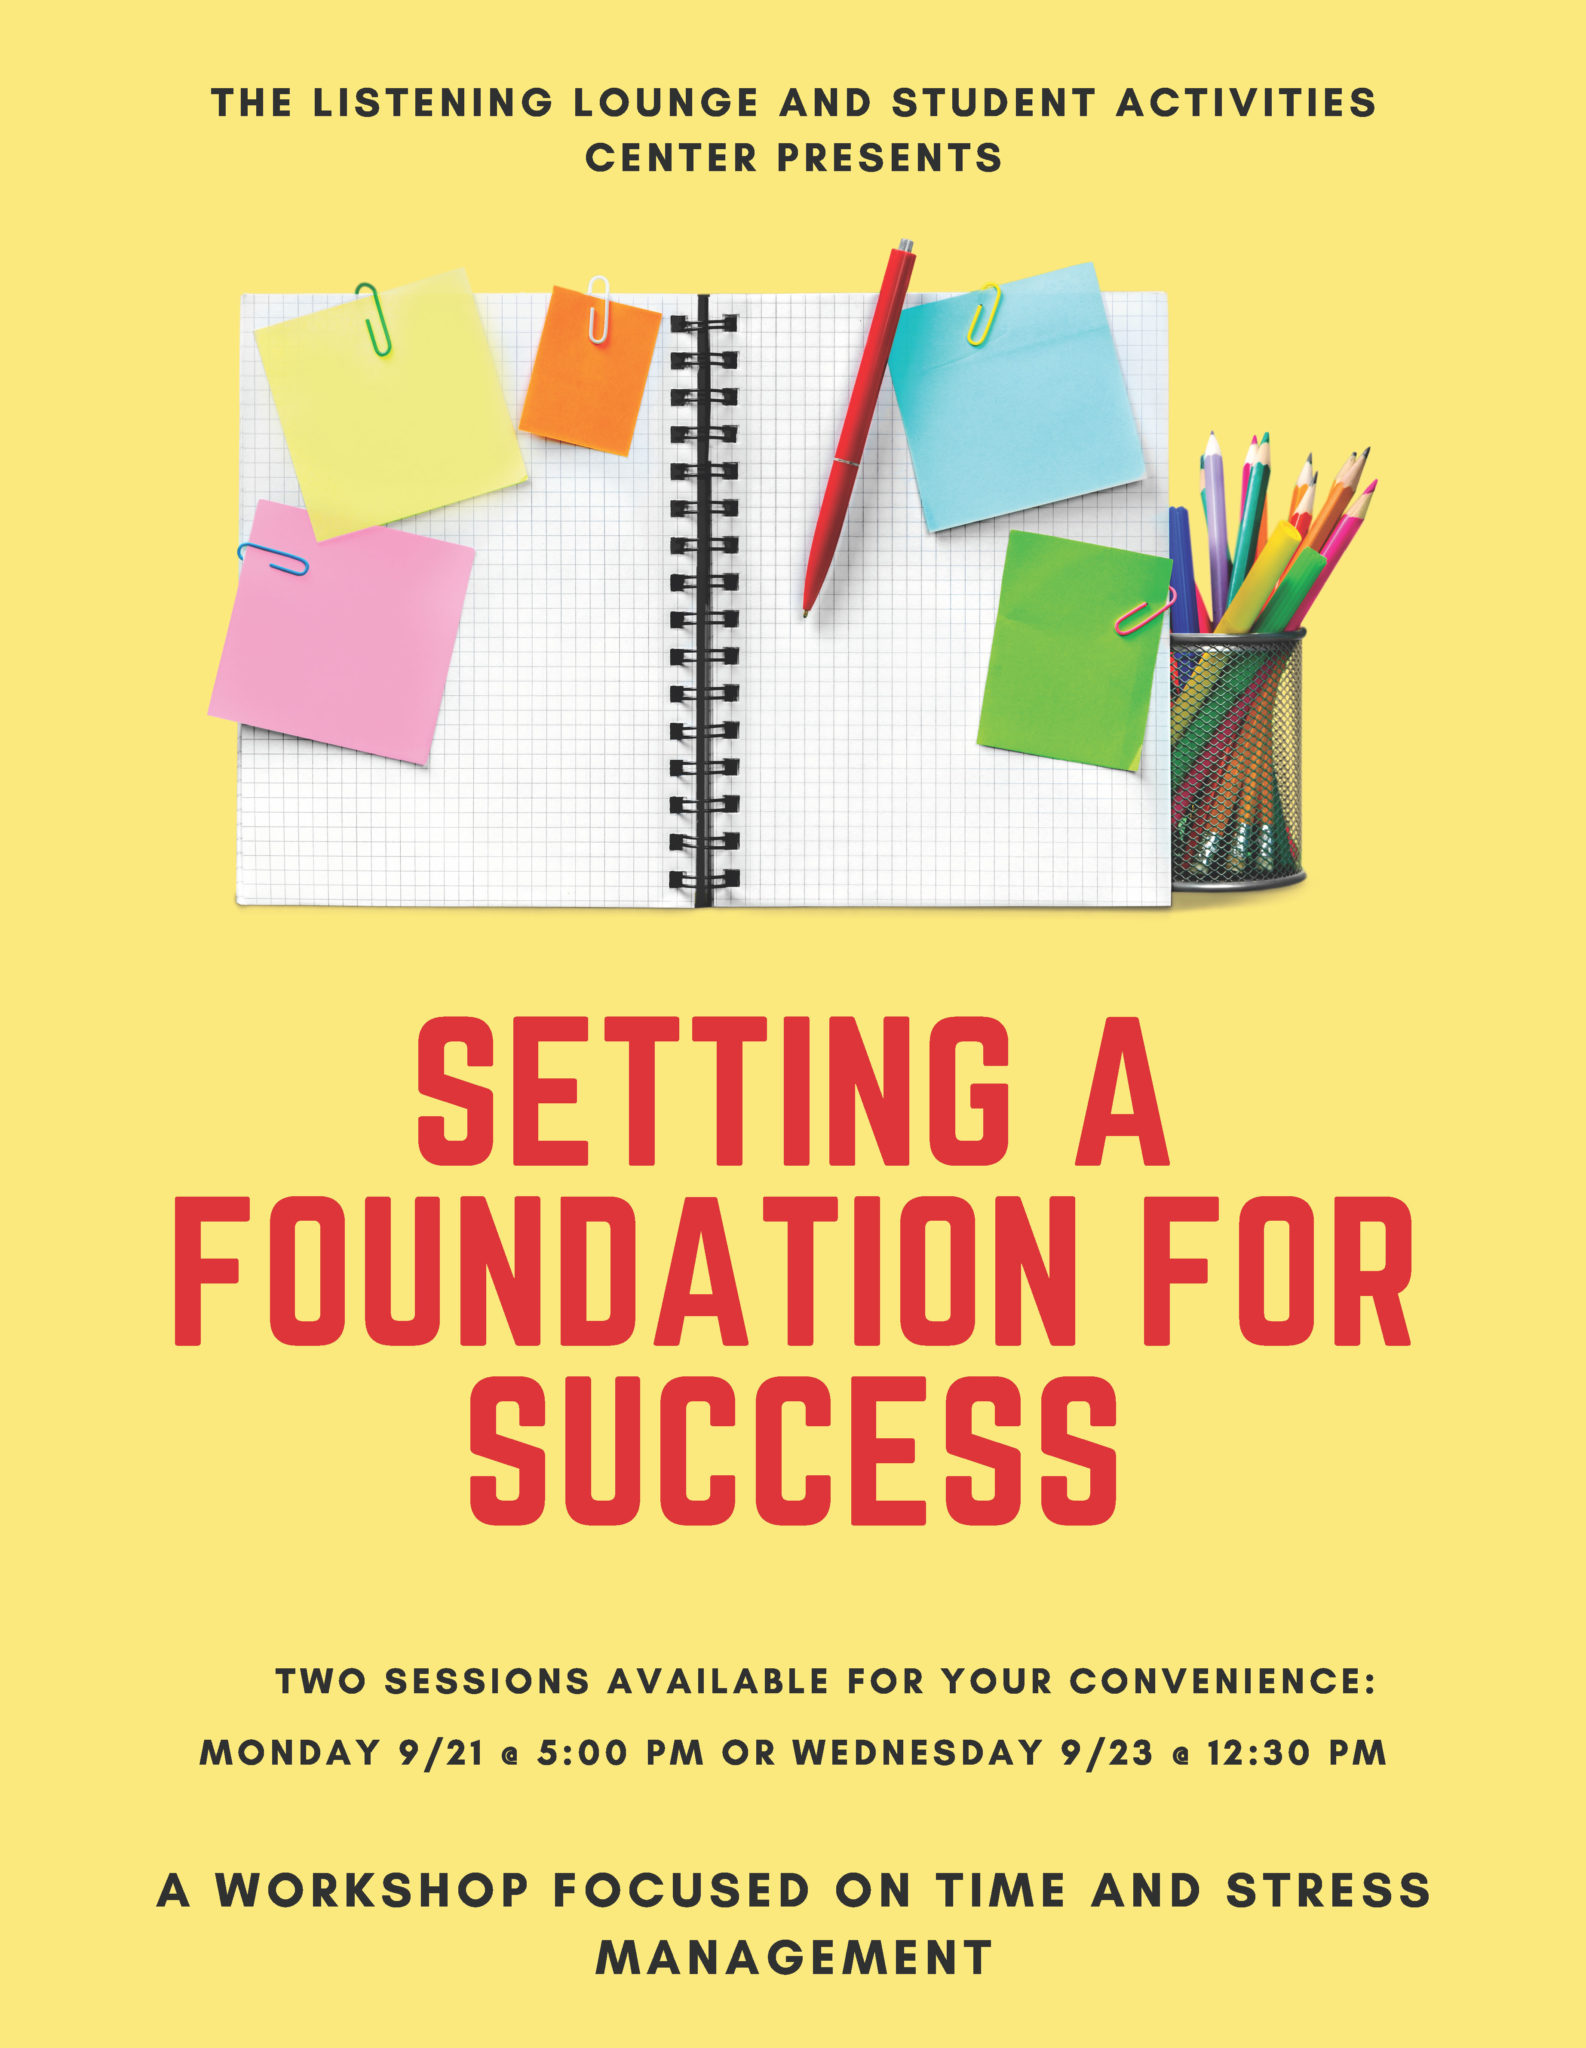 Setting a foundation for success poster-details below